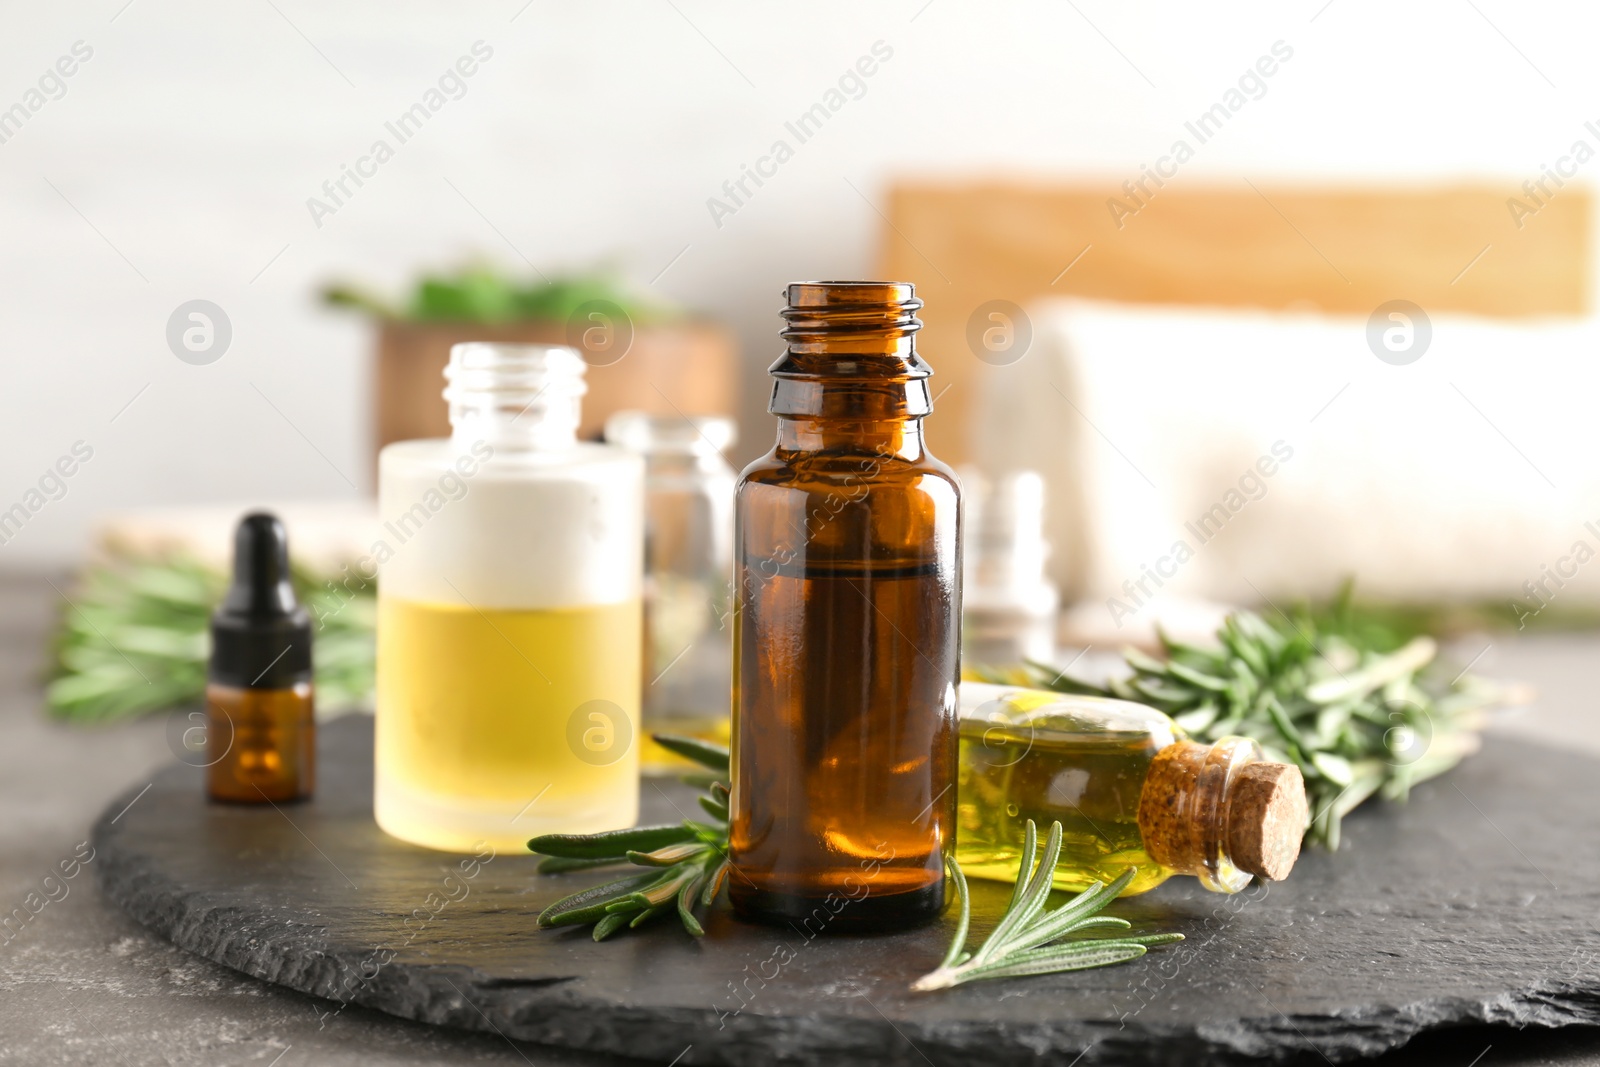 Photo of Bottles with essential oils on slate plate